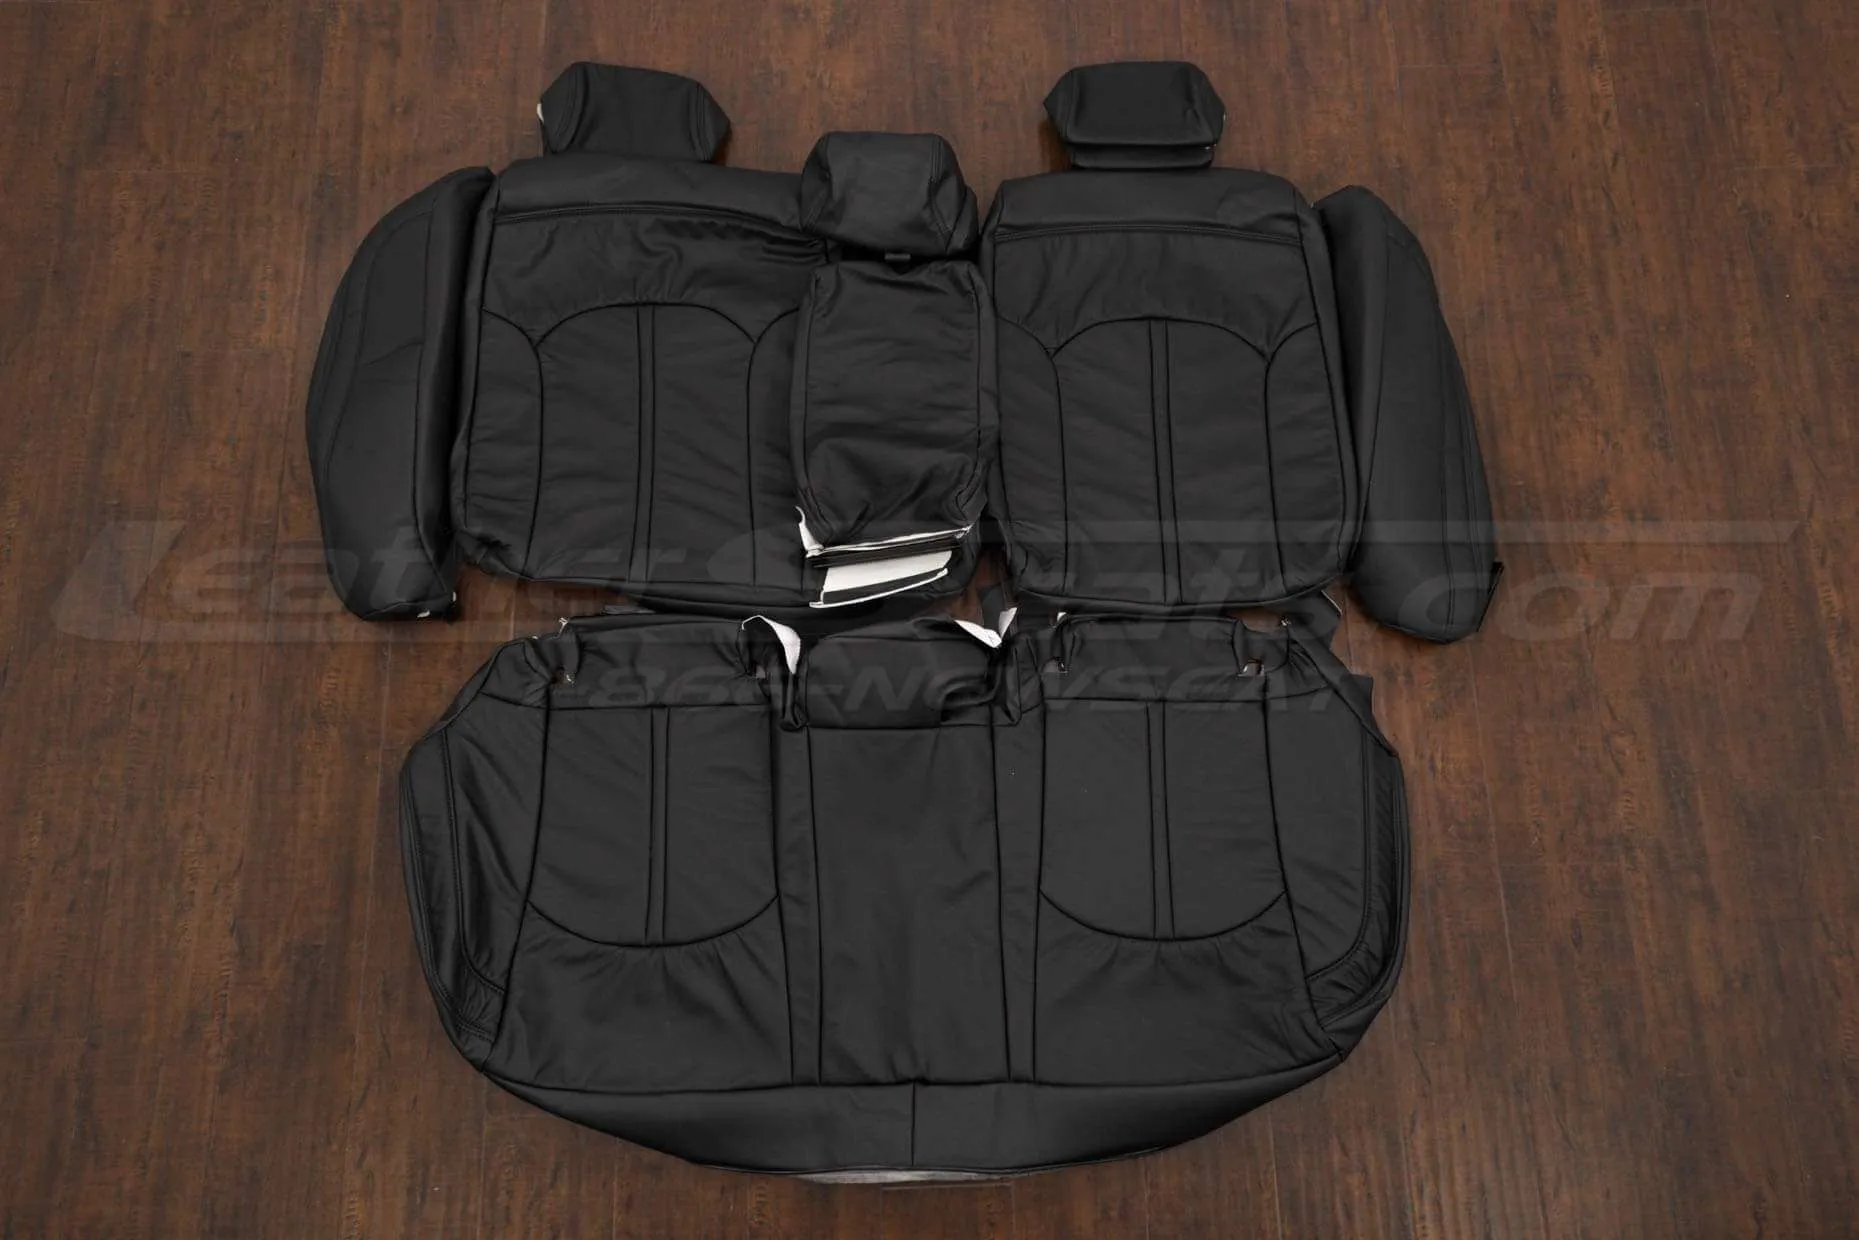 Hyudai Sonata Sport Leather Kit - Black - Rear seat upholstery with armrest and bolsters